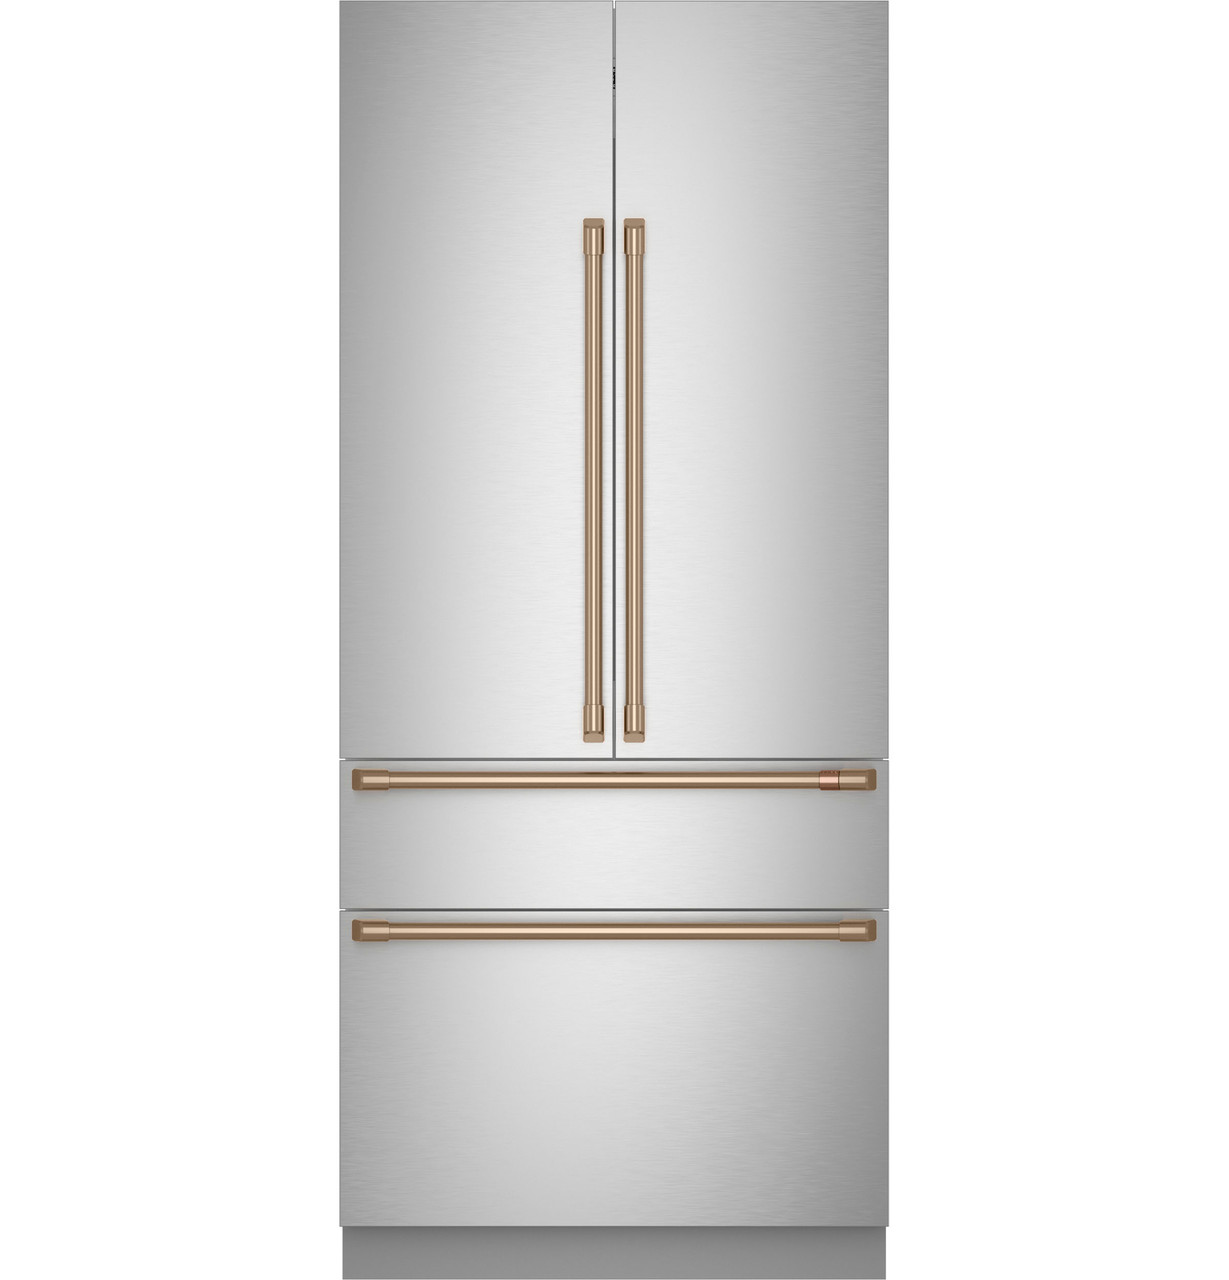 Shop These Refrigerator Organizer Deals for January 2023